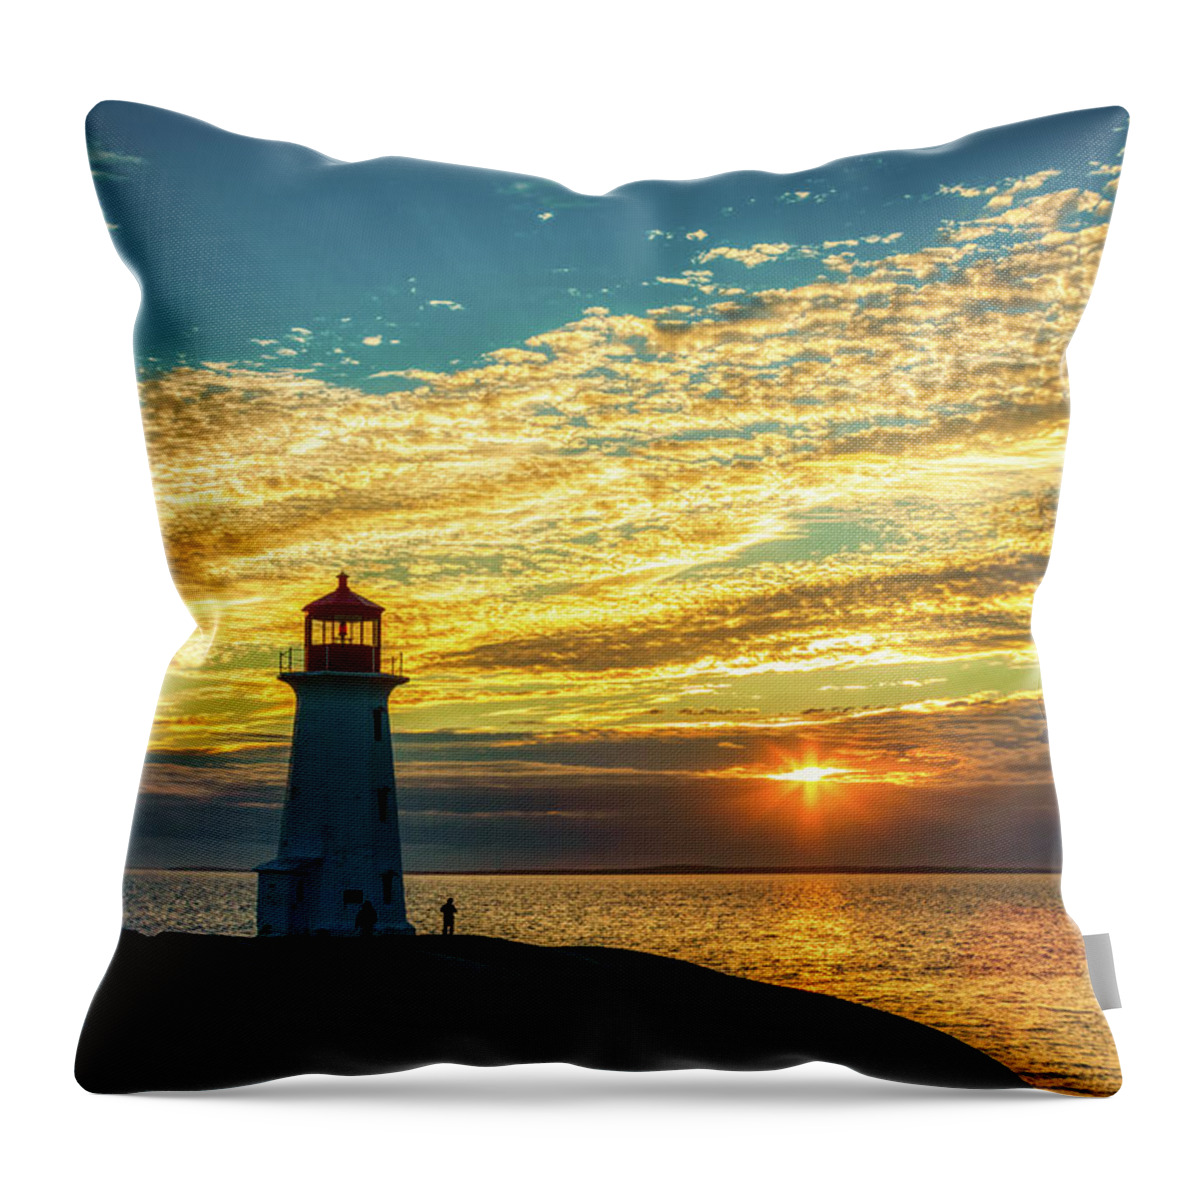 Peggy's Cove Throw Pillow featuring the photograph Peggy's Cove Lighthouse at Sunset by Tatiana Travelways